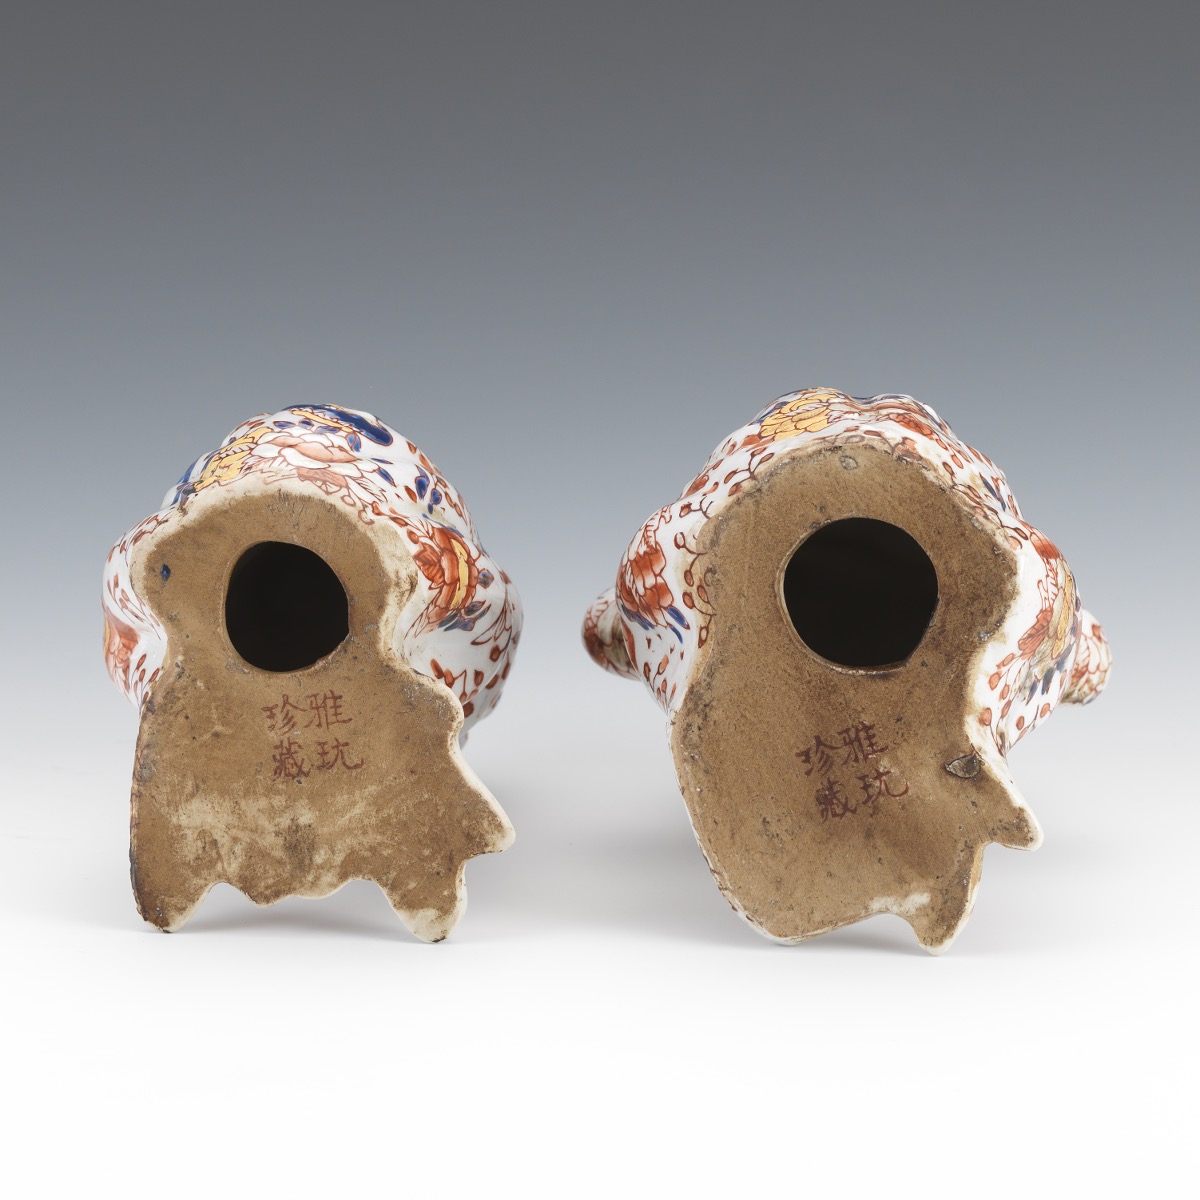 Two Japanese Porcelain Frogs, "Contemplation and Relaxation", by YaYou Zhen Cang - Image 7 of 7